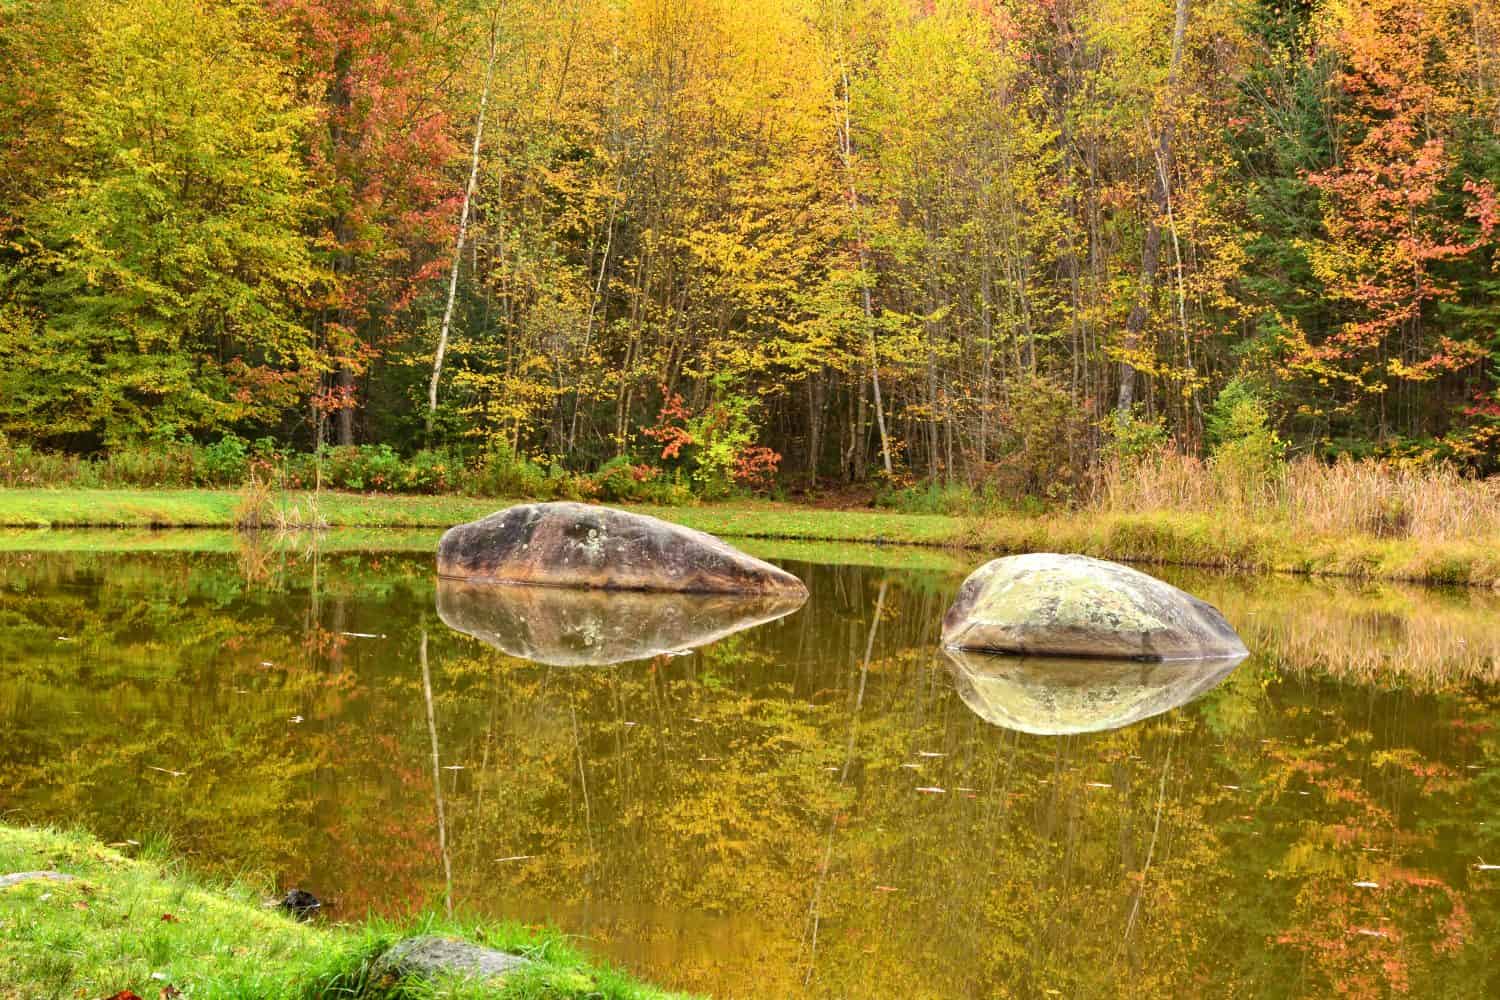 Reflections of large boulders and colorful autumn leaves on picturesque wildlife pond in Bretzfelder Memorial Park, Bethlehem, New Hampshire.